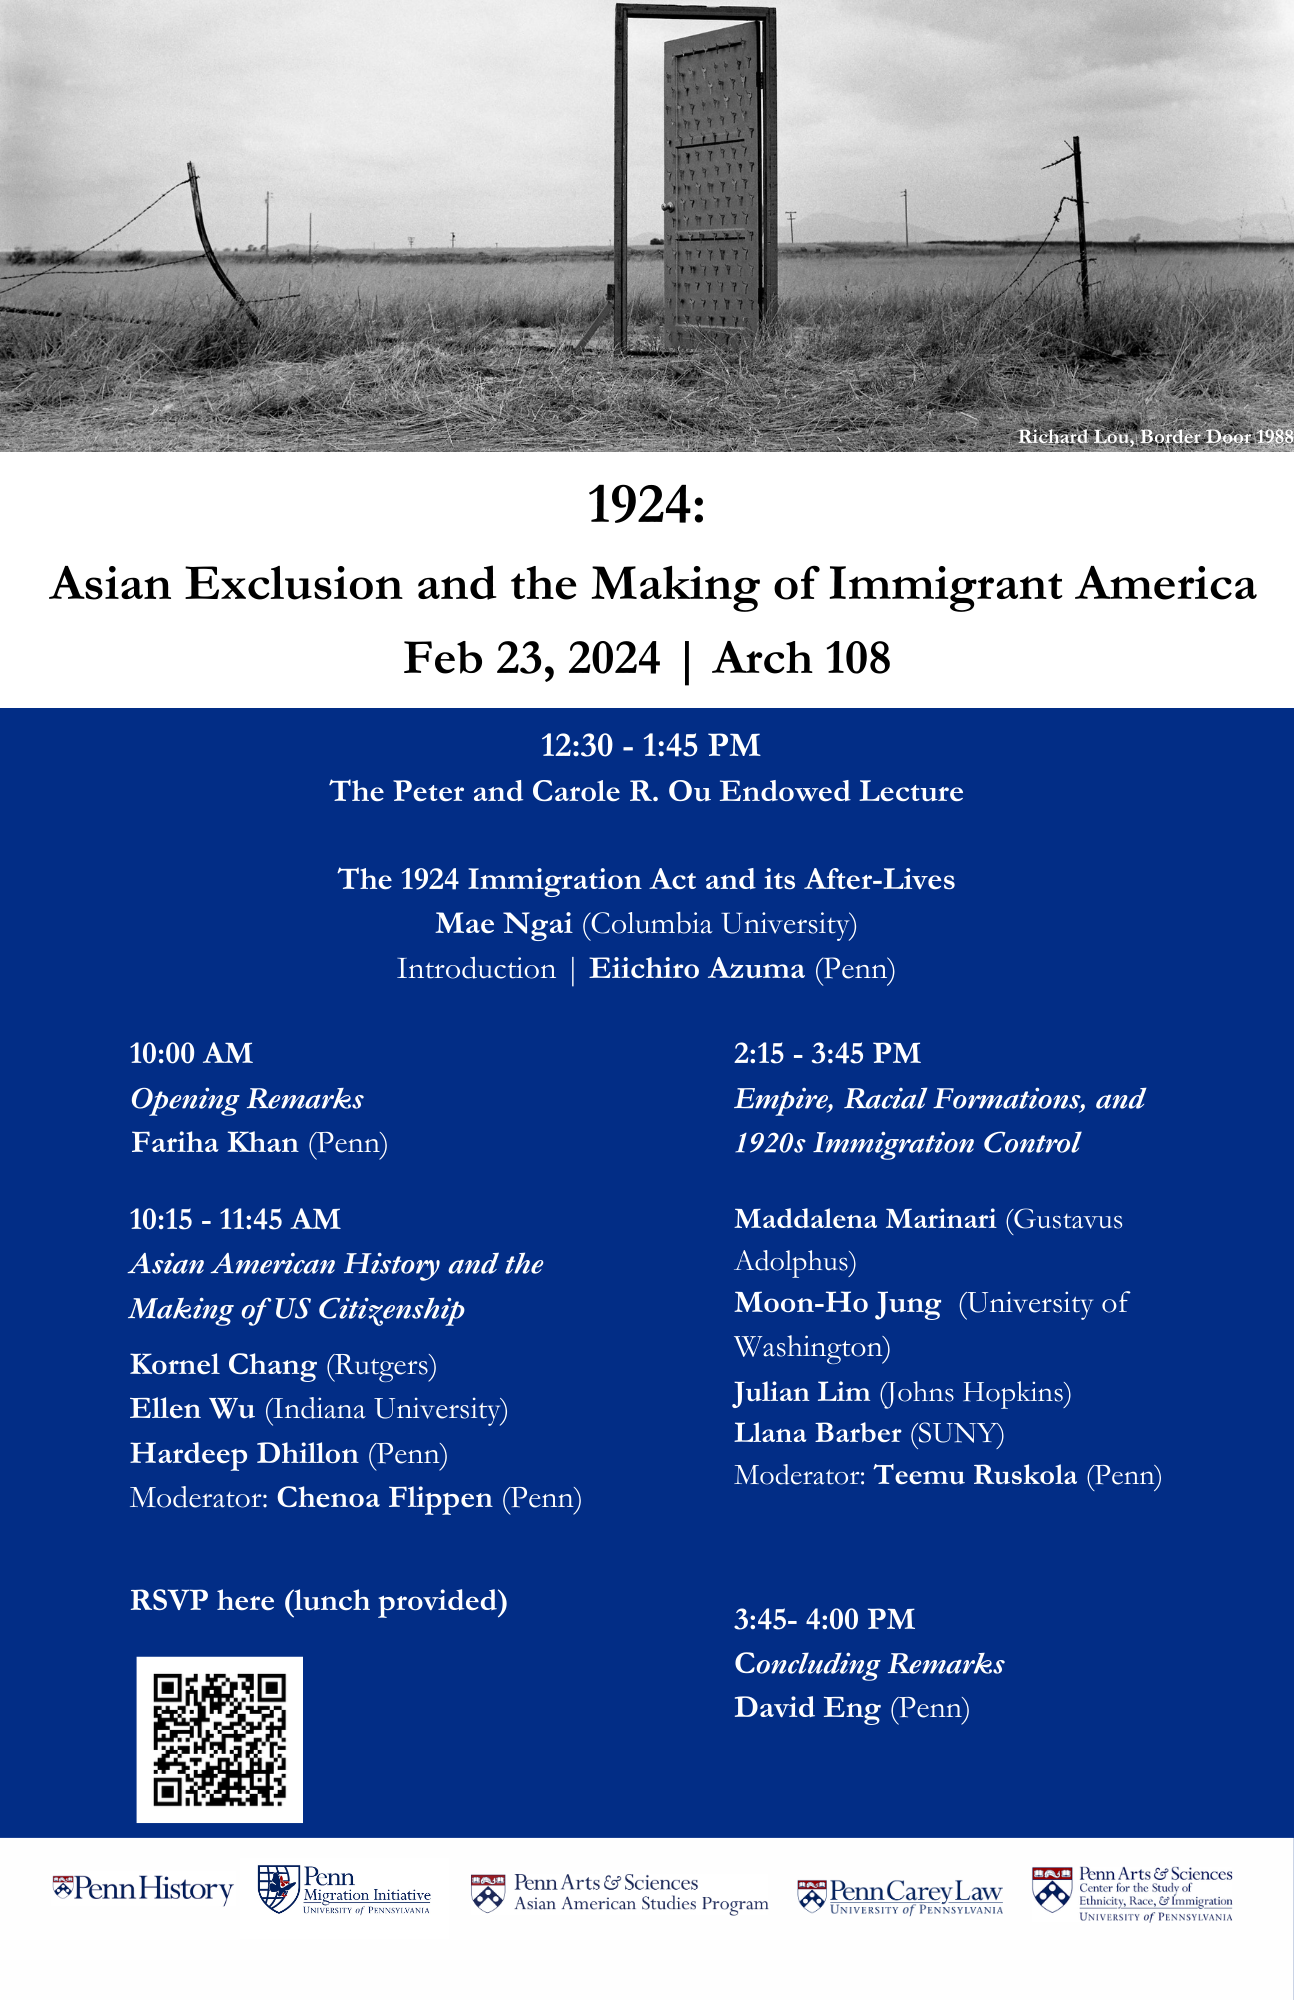 Symposium 1924 Asian Exclusion and the Making of Immigrant America Program